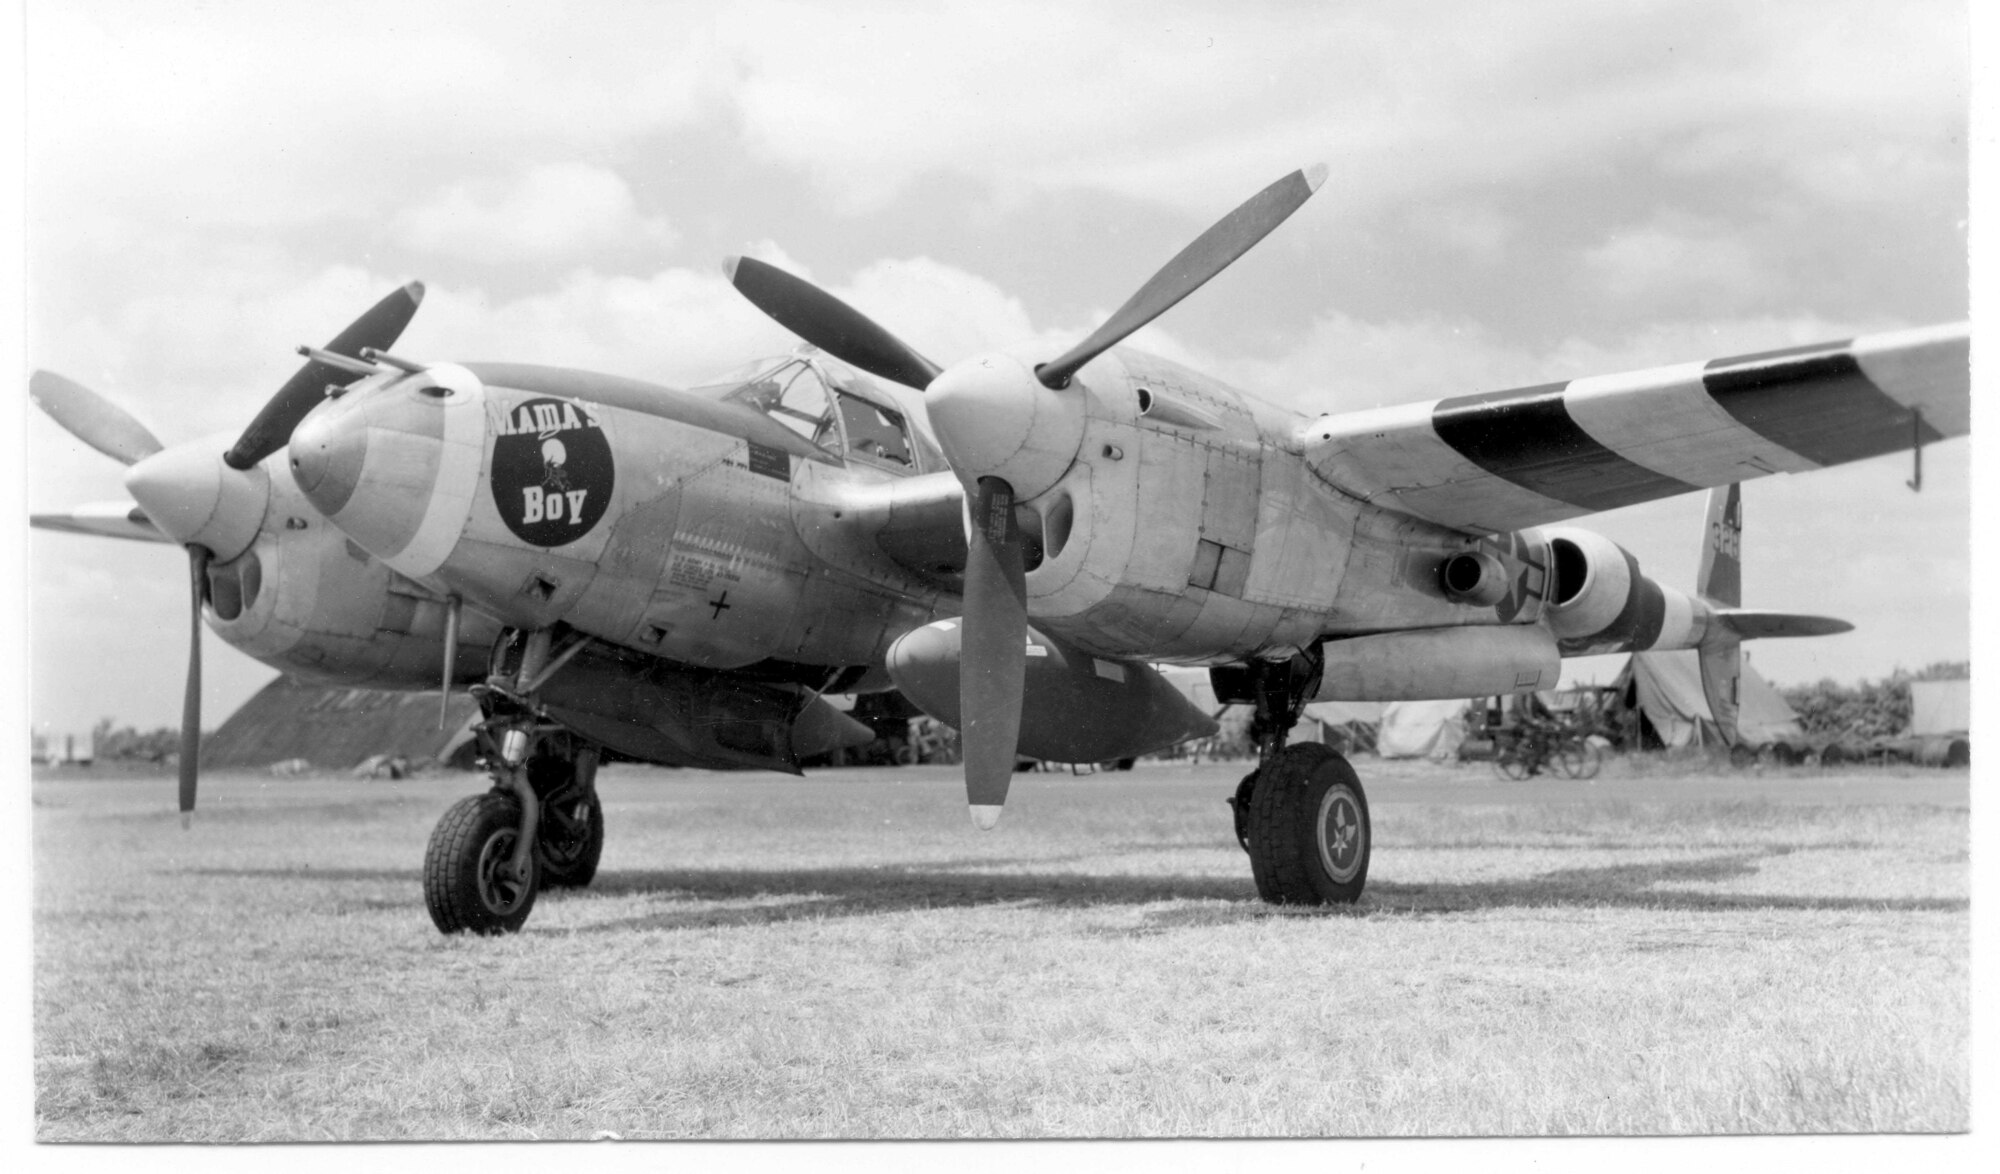 The 20th Fighter Group, now the 20th Operations Group, flew variations of the P-38 during World War II while they were stationed at King’s Cliffe.